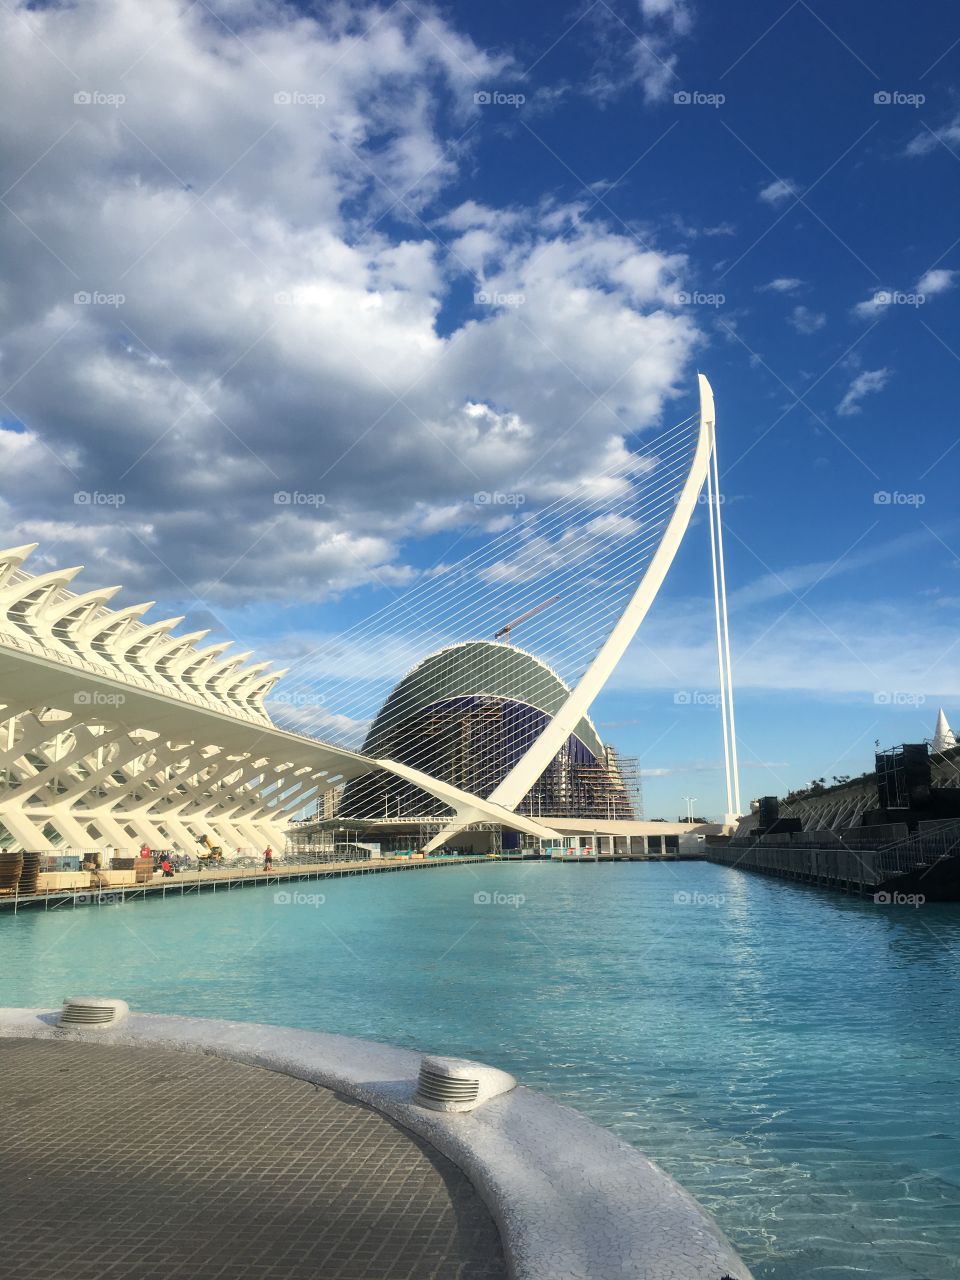 The opera house of Valencia. Also featured are a science museum and convention space area. A major draw for tourists and locals alike. 